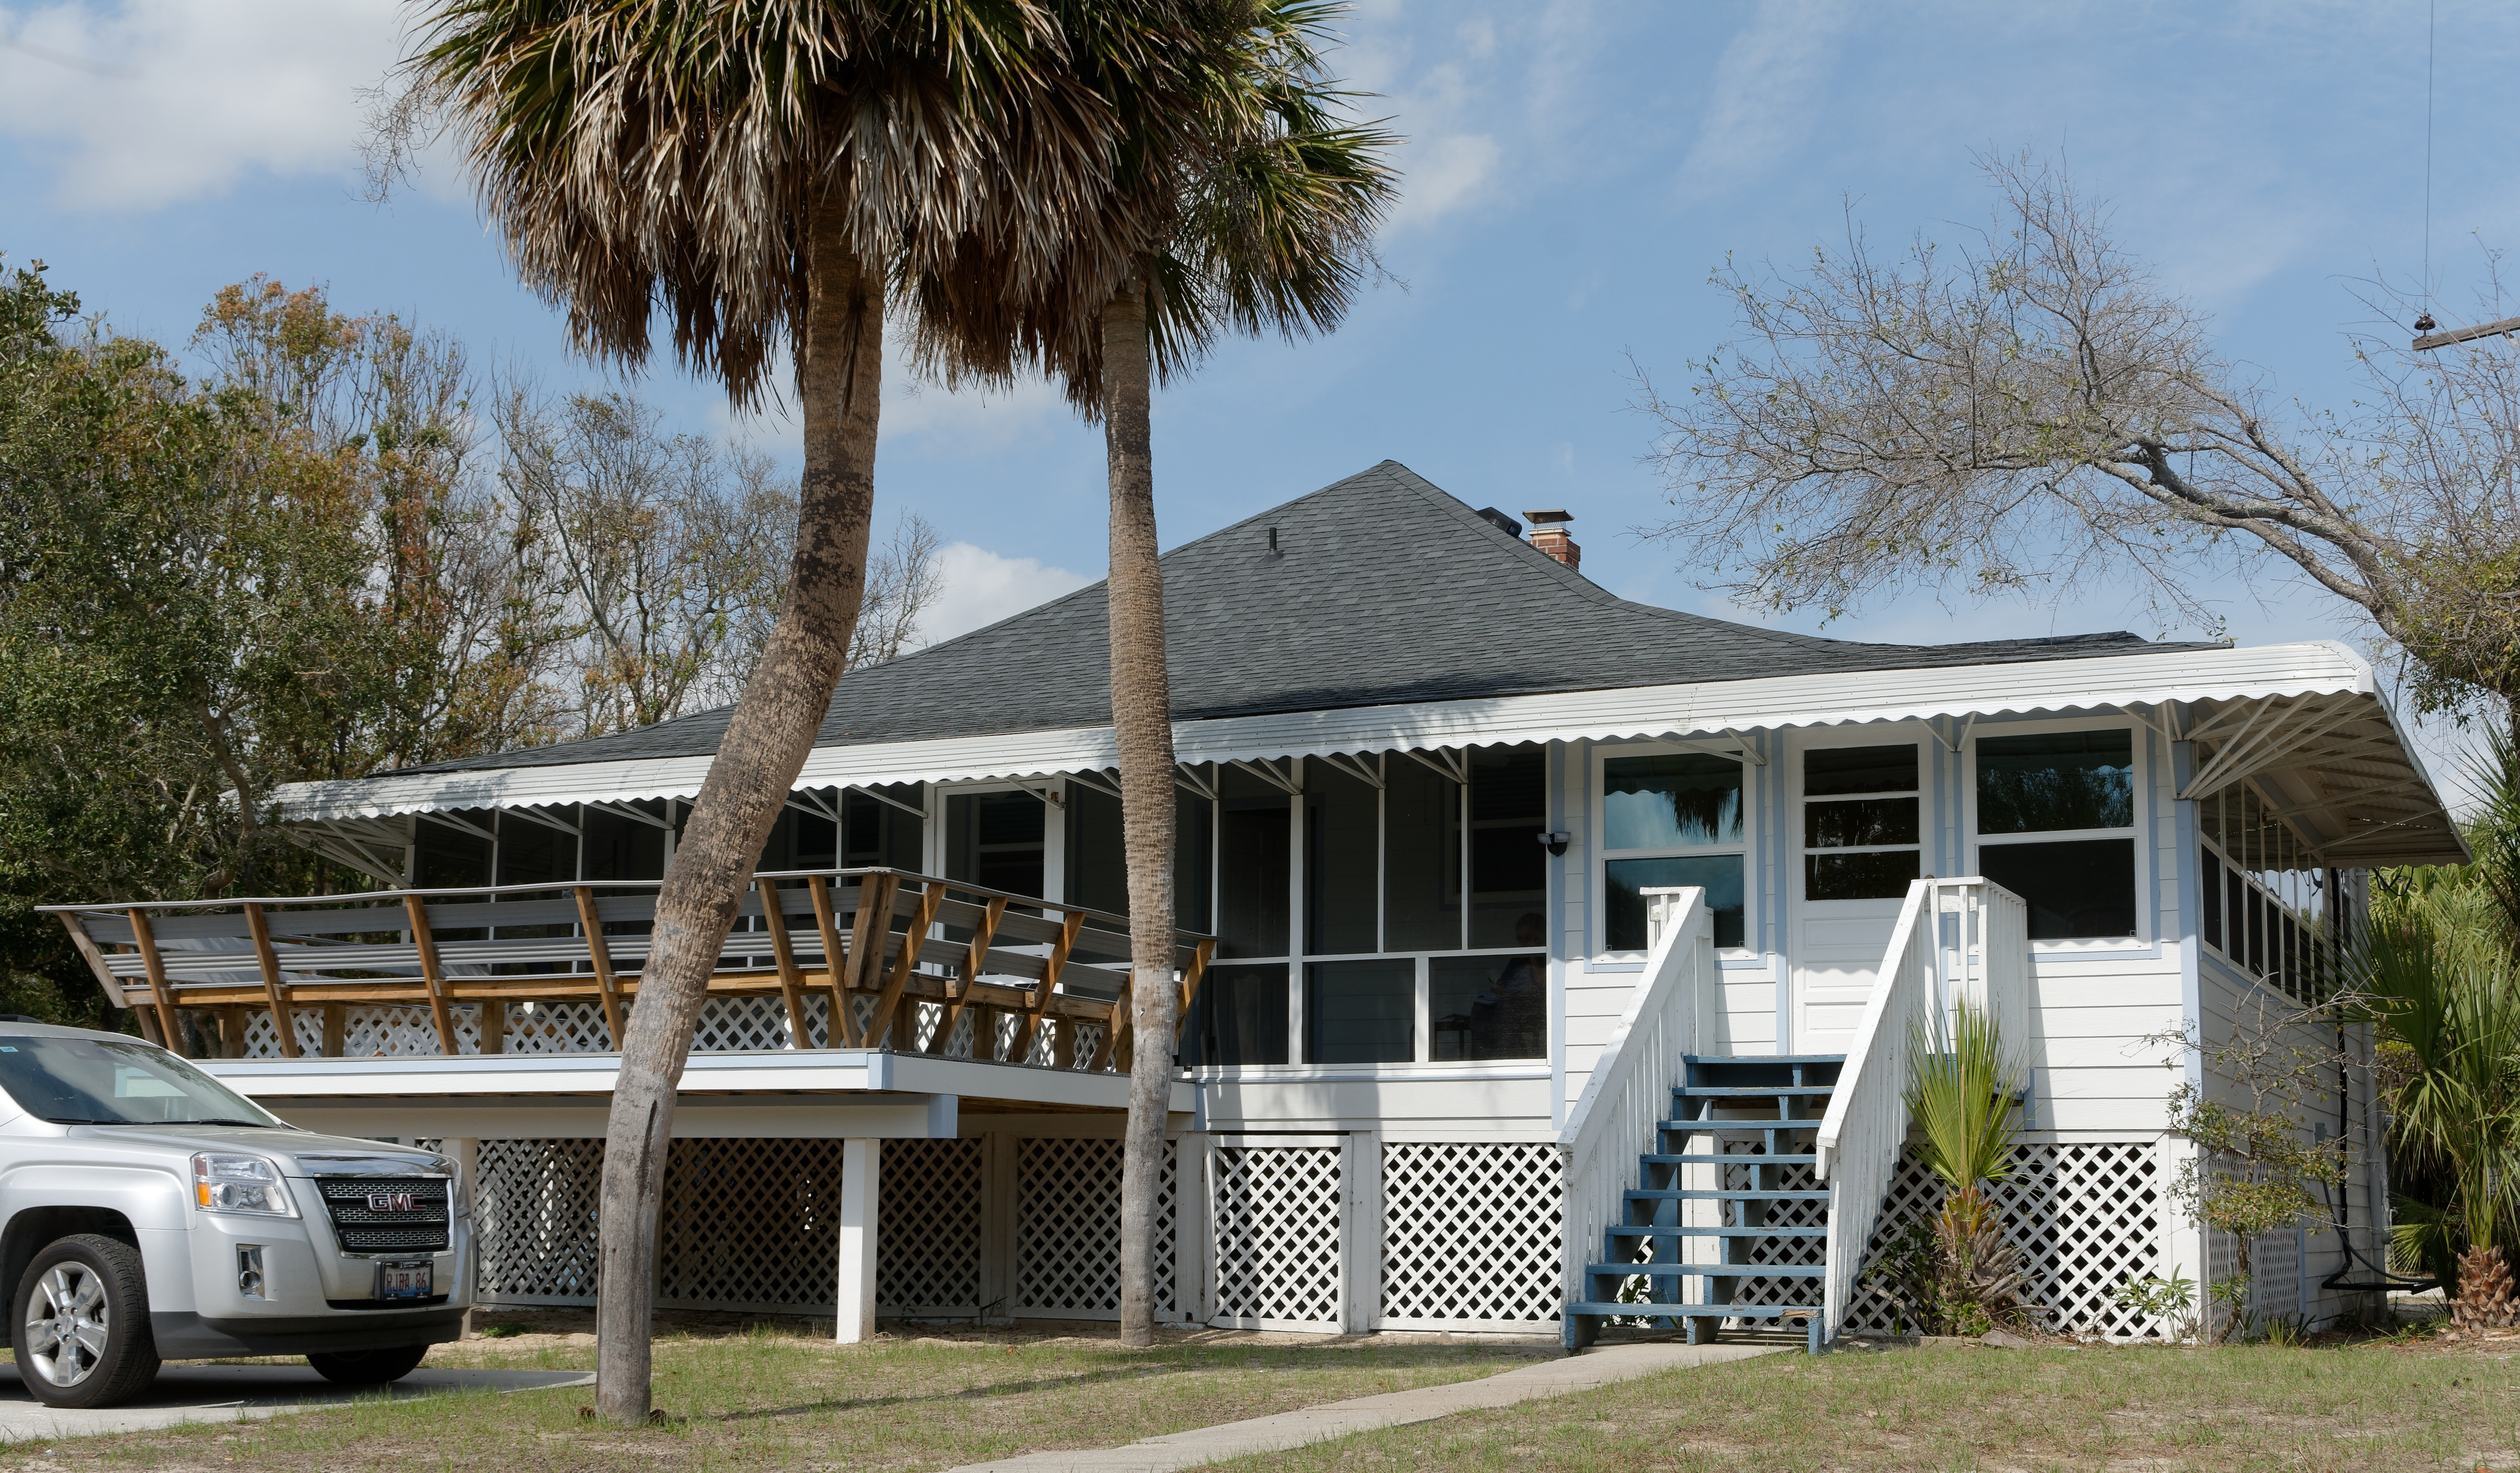 Tybee Island Strand Cottages Historic District Wikipedia